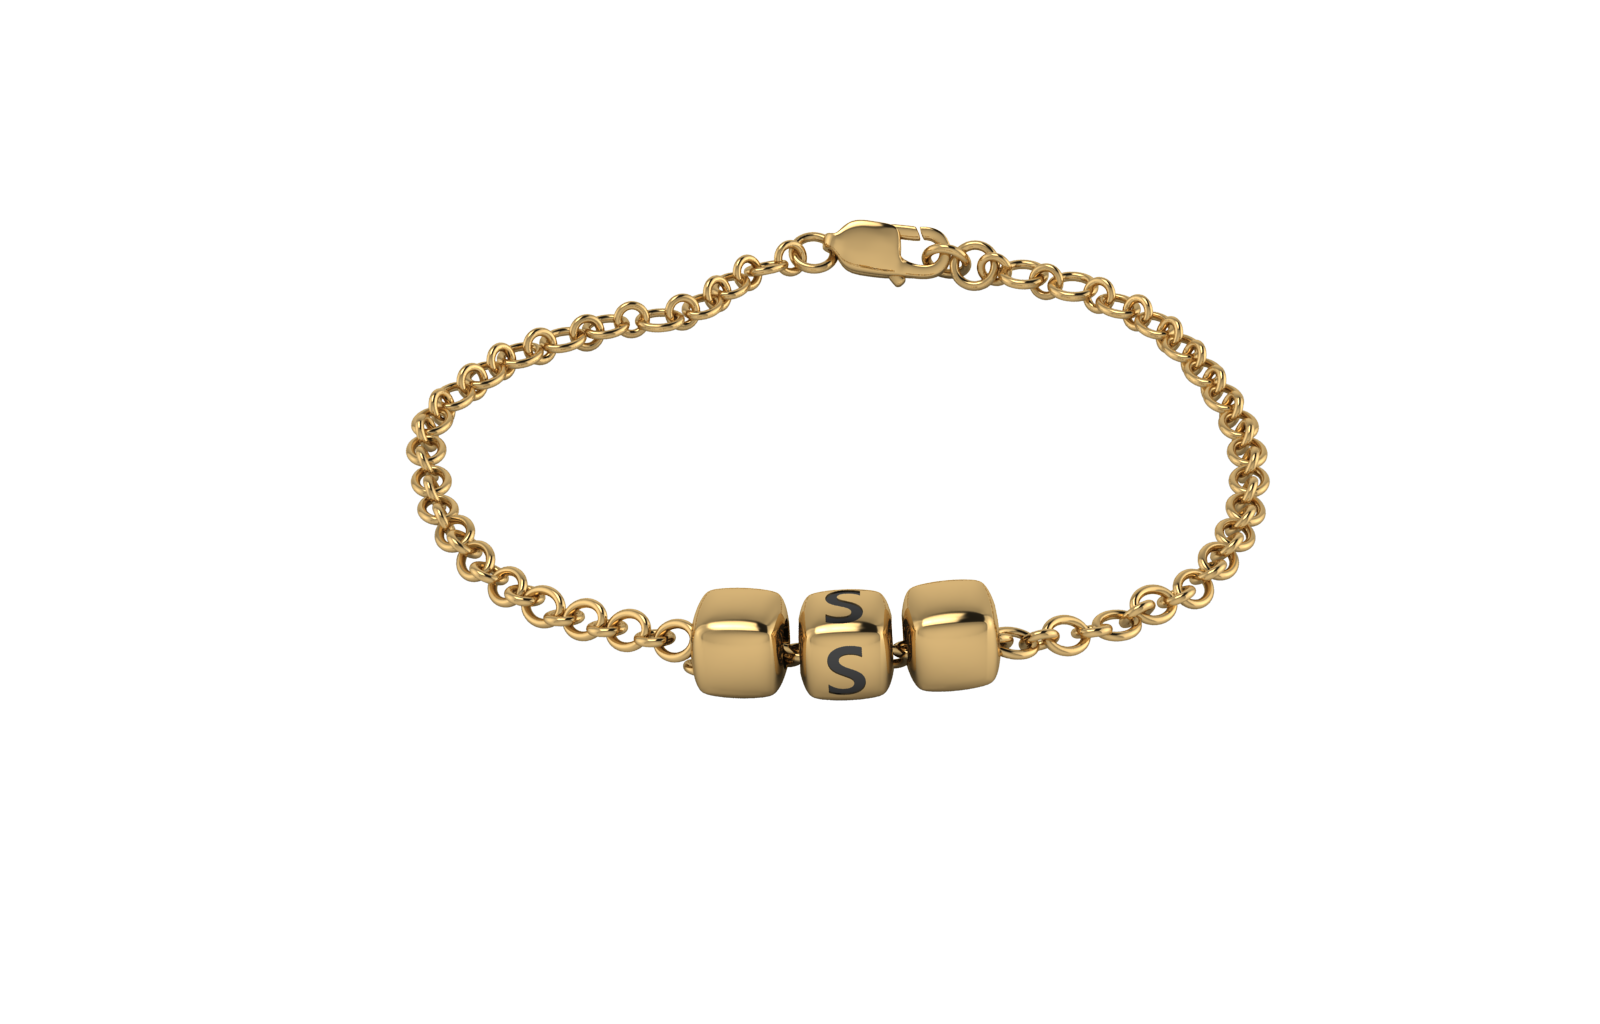 Buy First Quality Forming Gold Attractive Chain Type Broad Bracelet Buy  Online Shopping